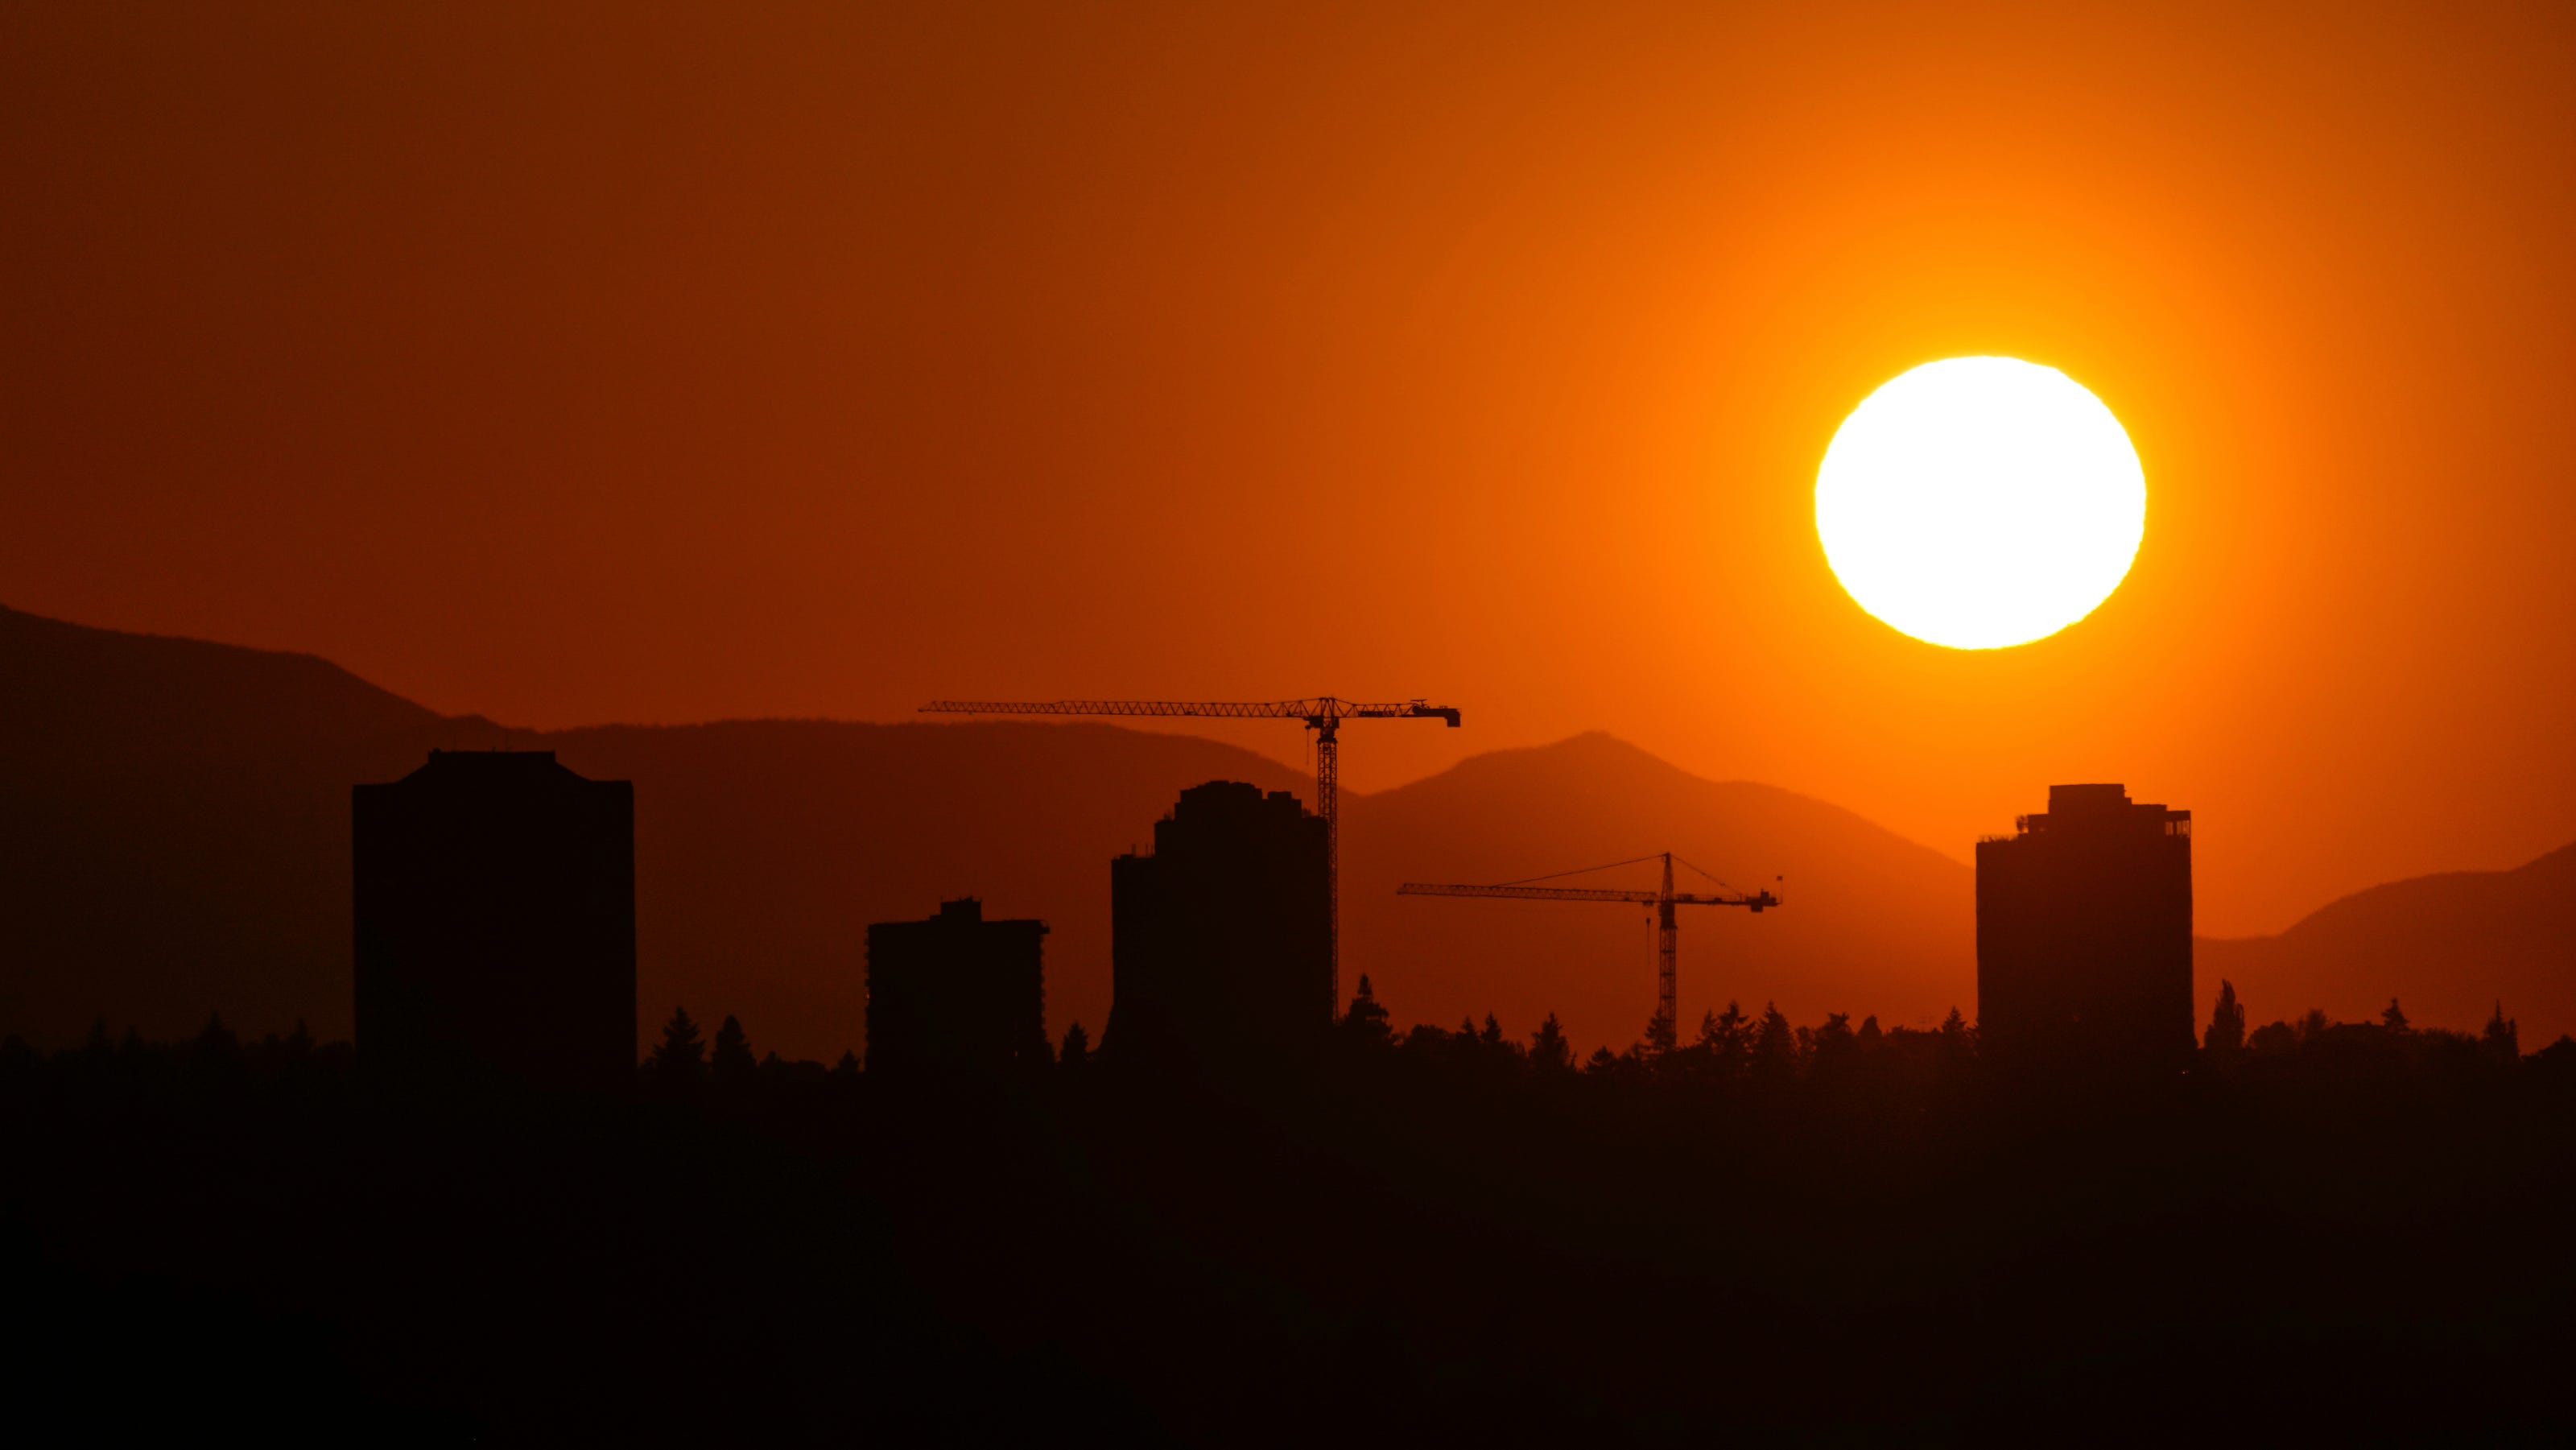 Weather update: Seattle, Portland could see record heat 20-25 degrees above normal